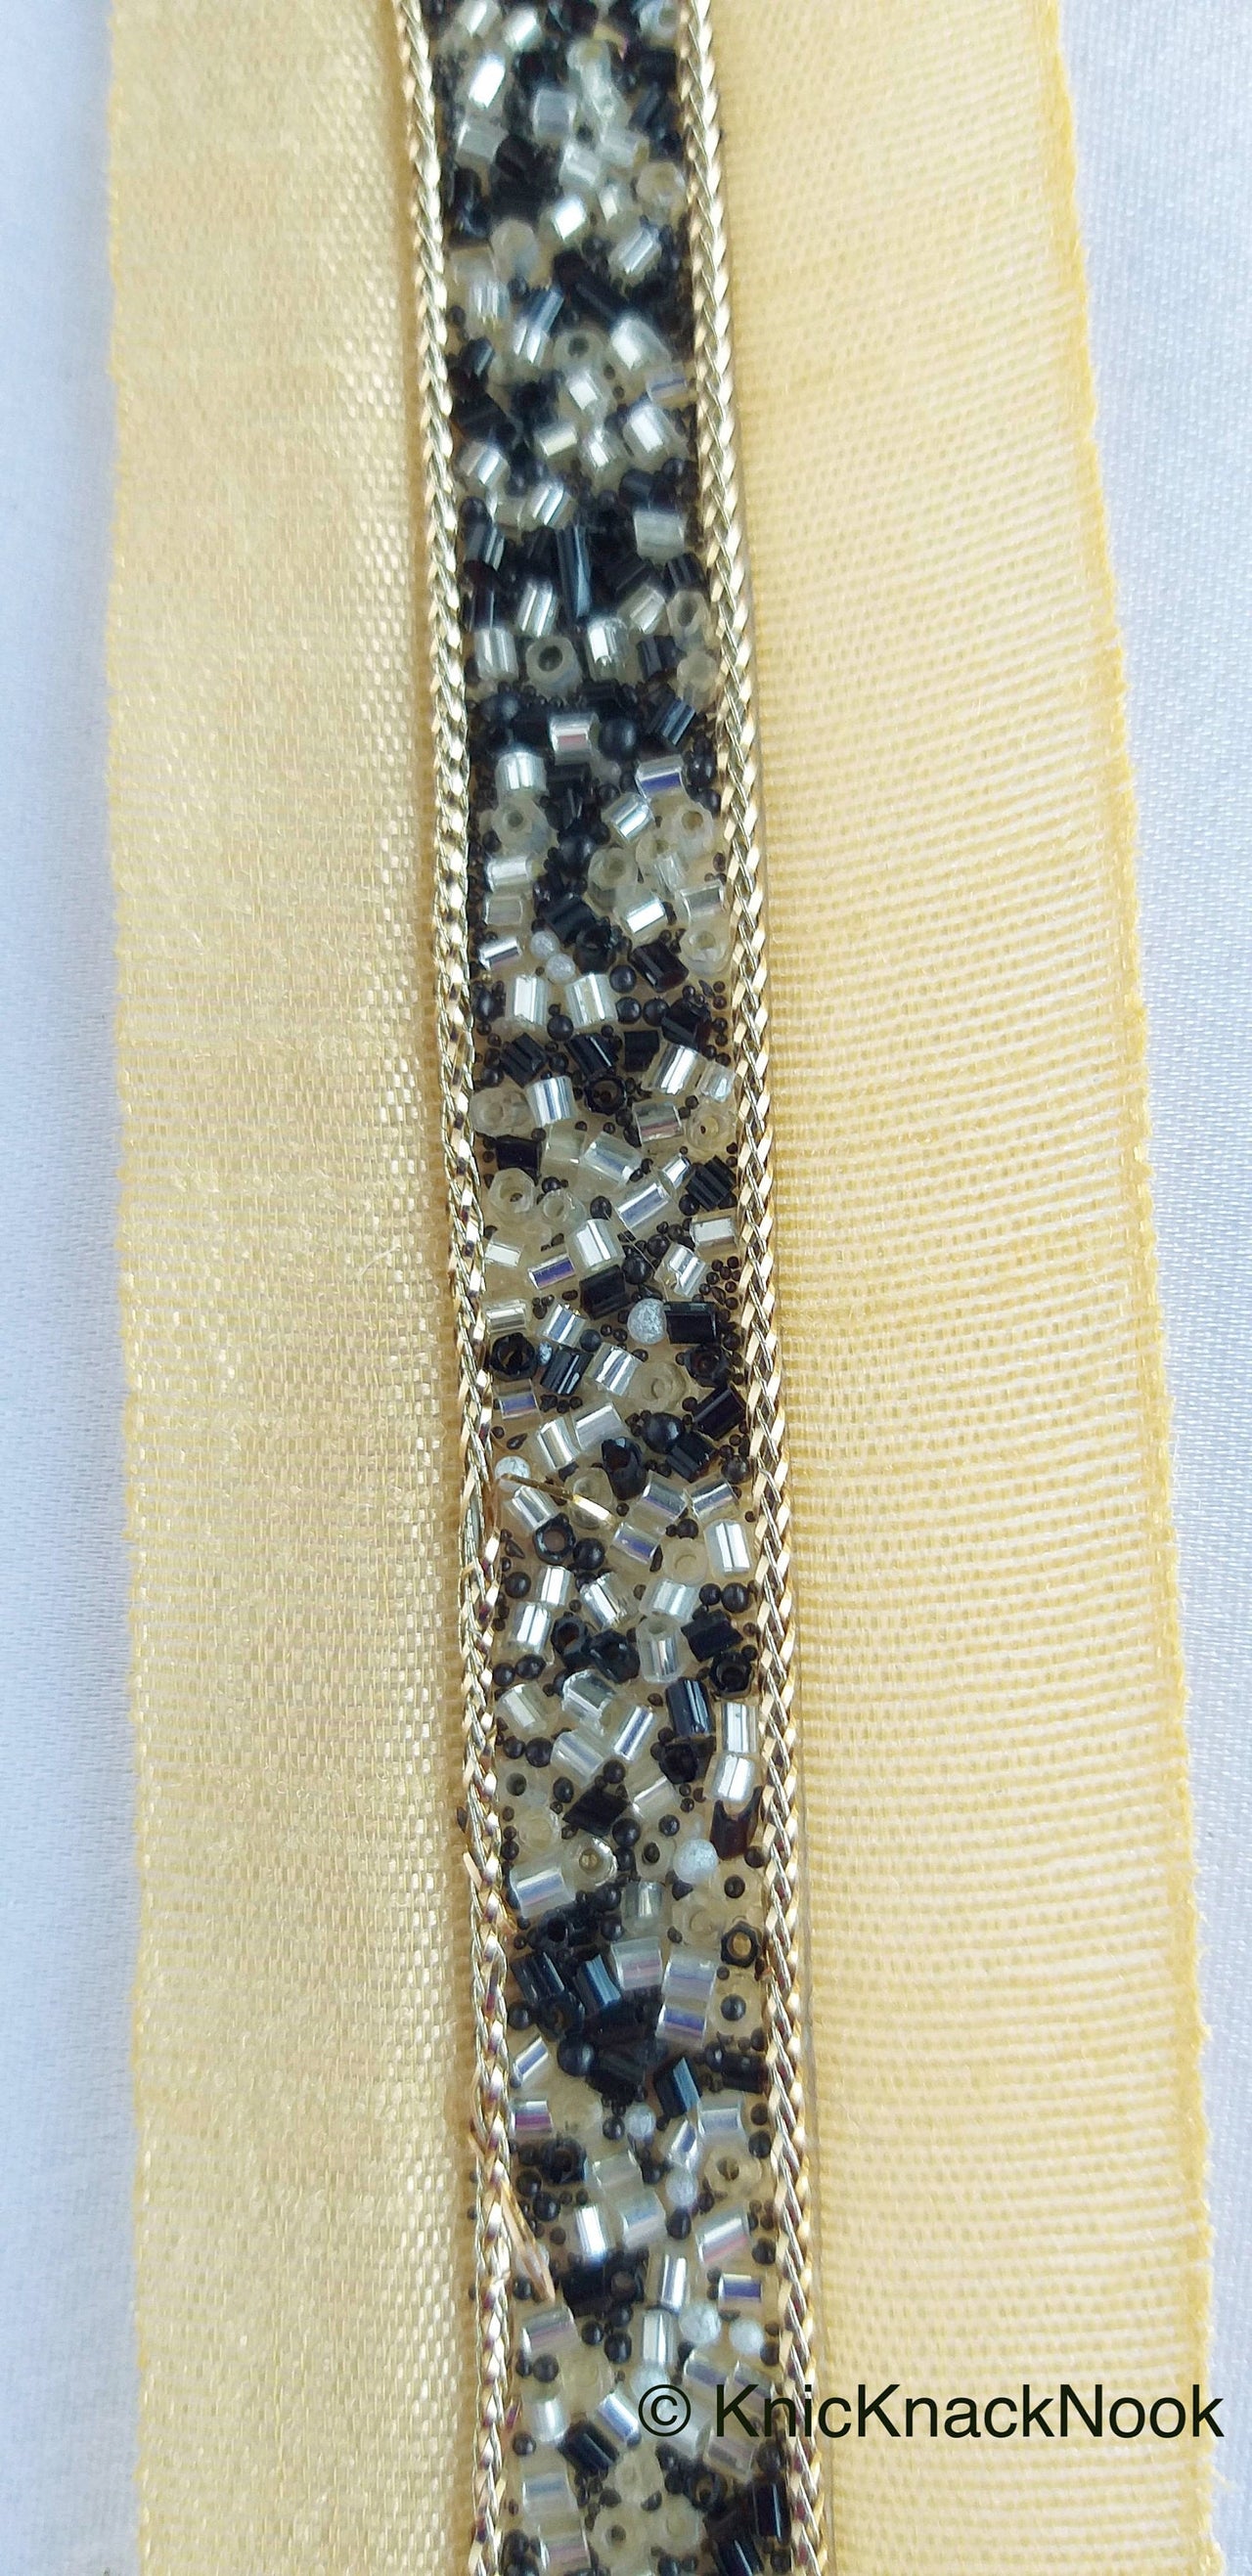 Beige Fabric Trim With Black And White Beads Embellishments, Beaded Trim, Approx. 38mm